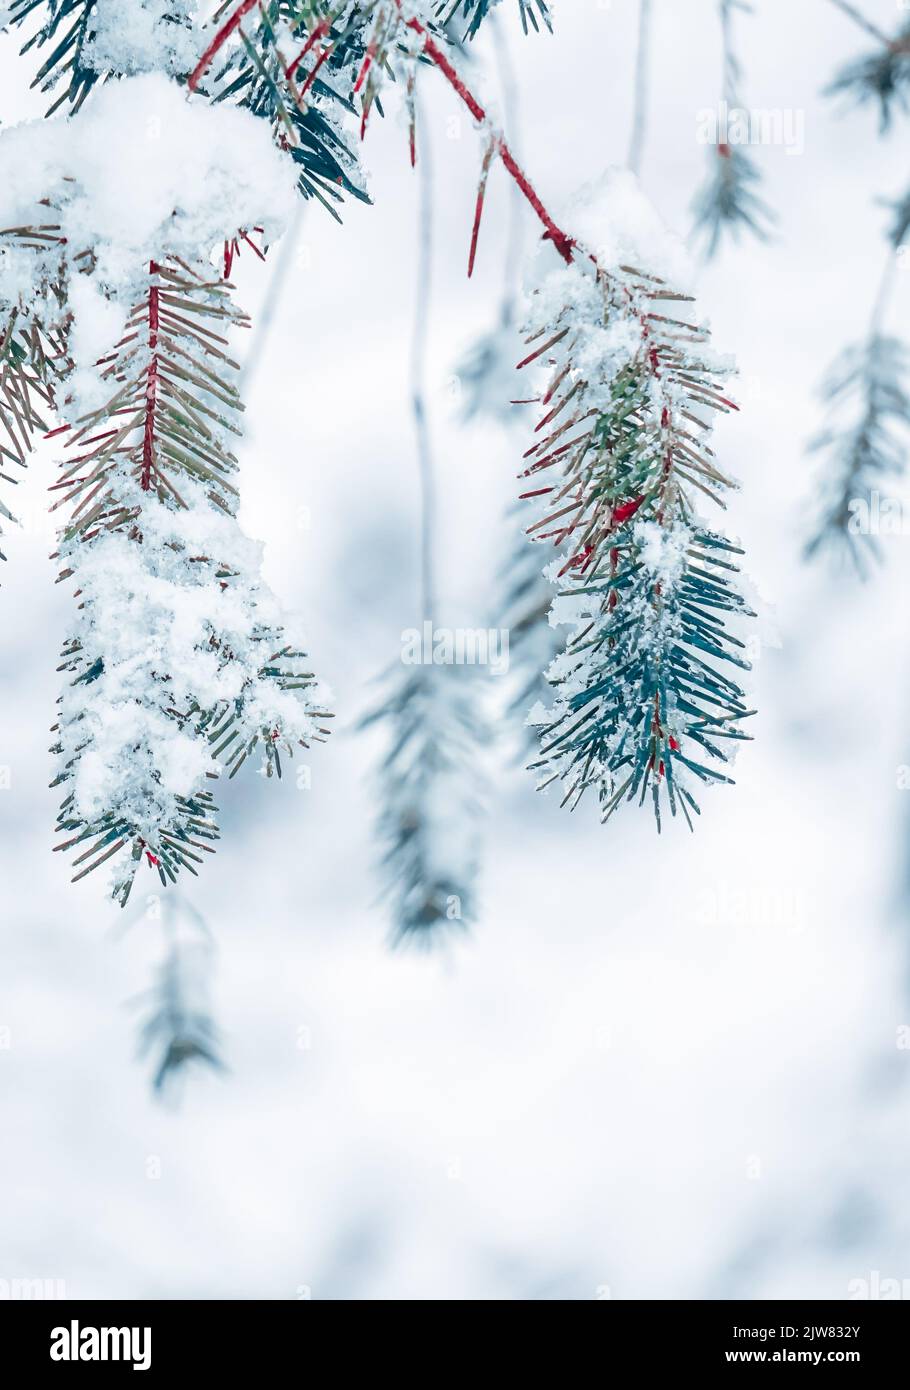 snow on the pine tree leaves in winter season, white background Stock Photo